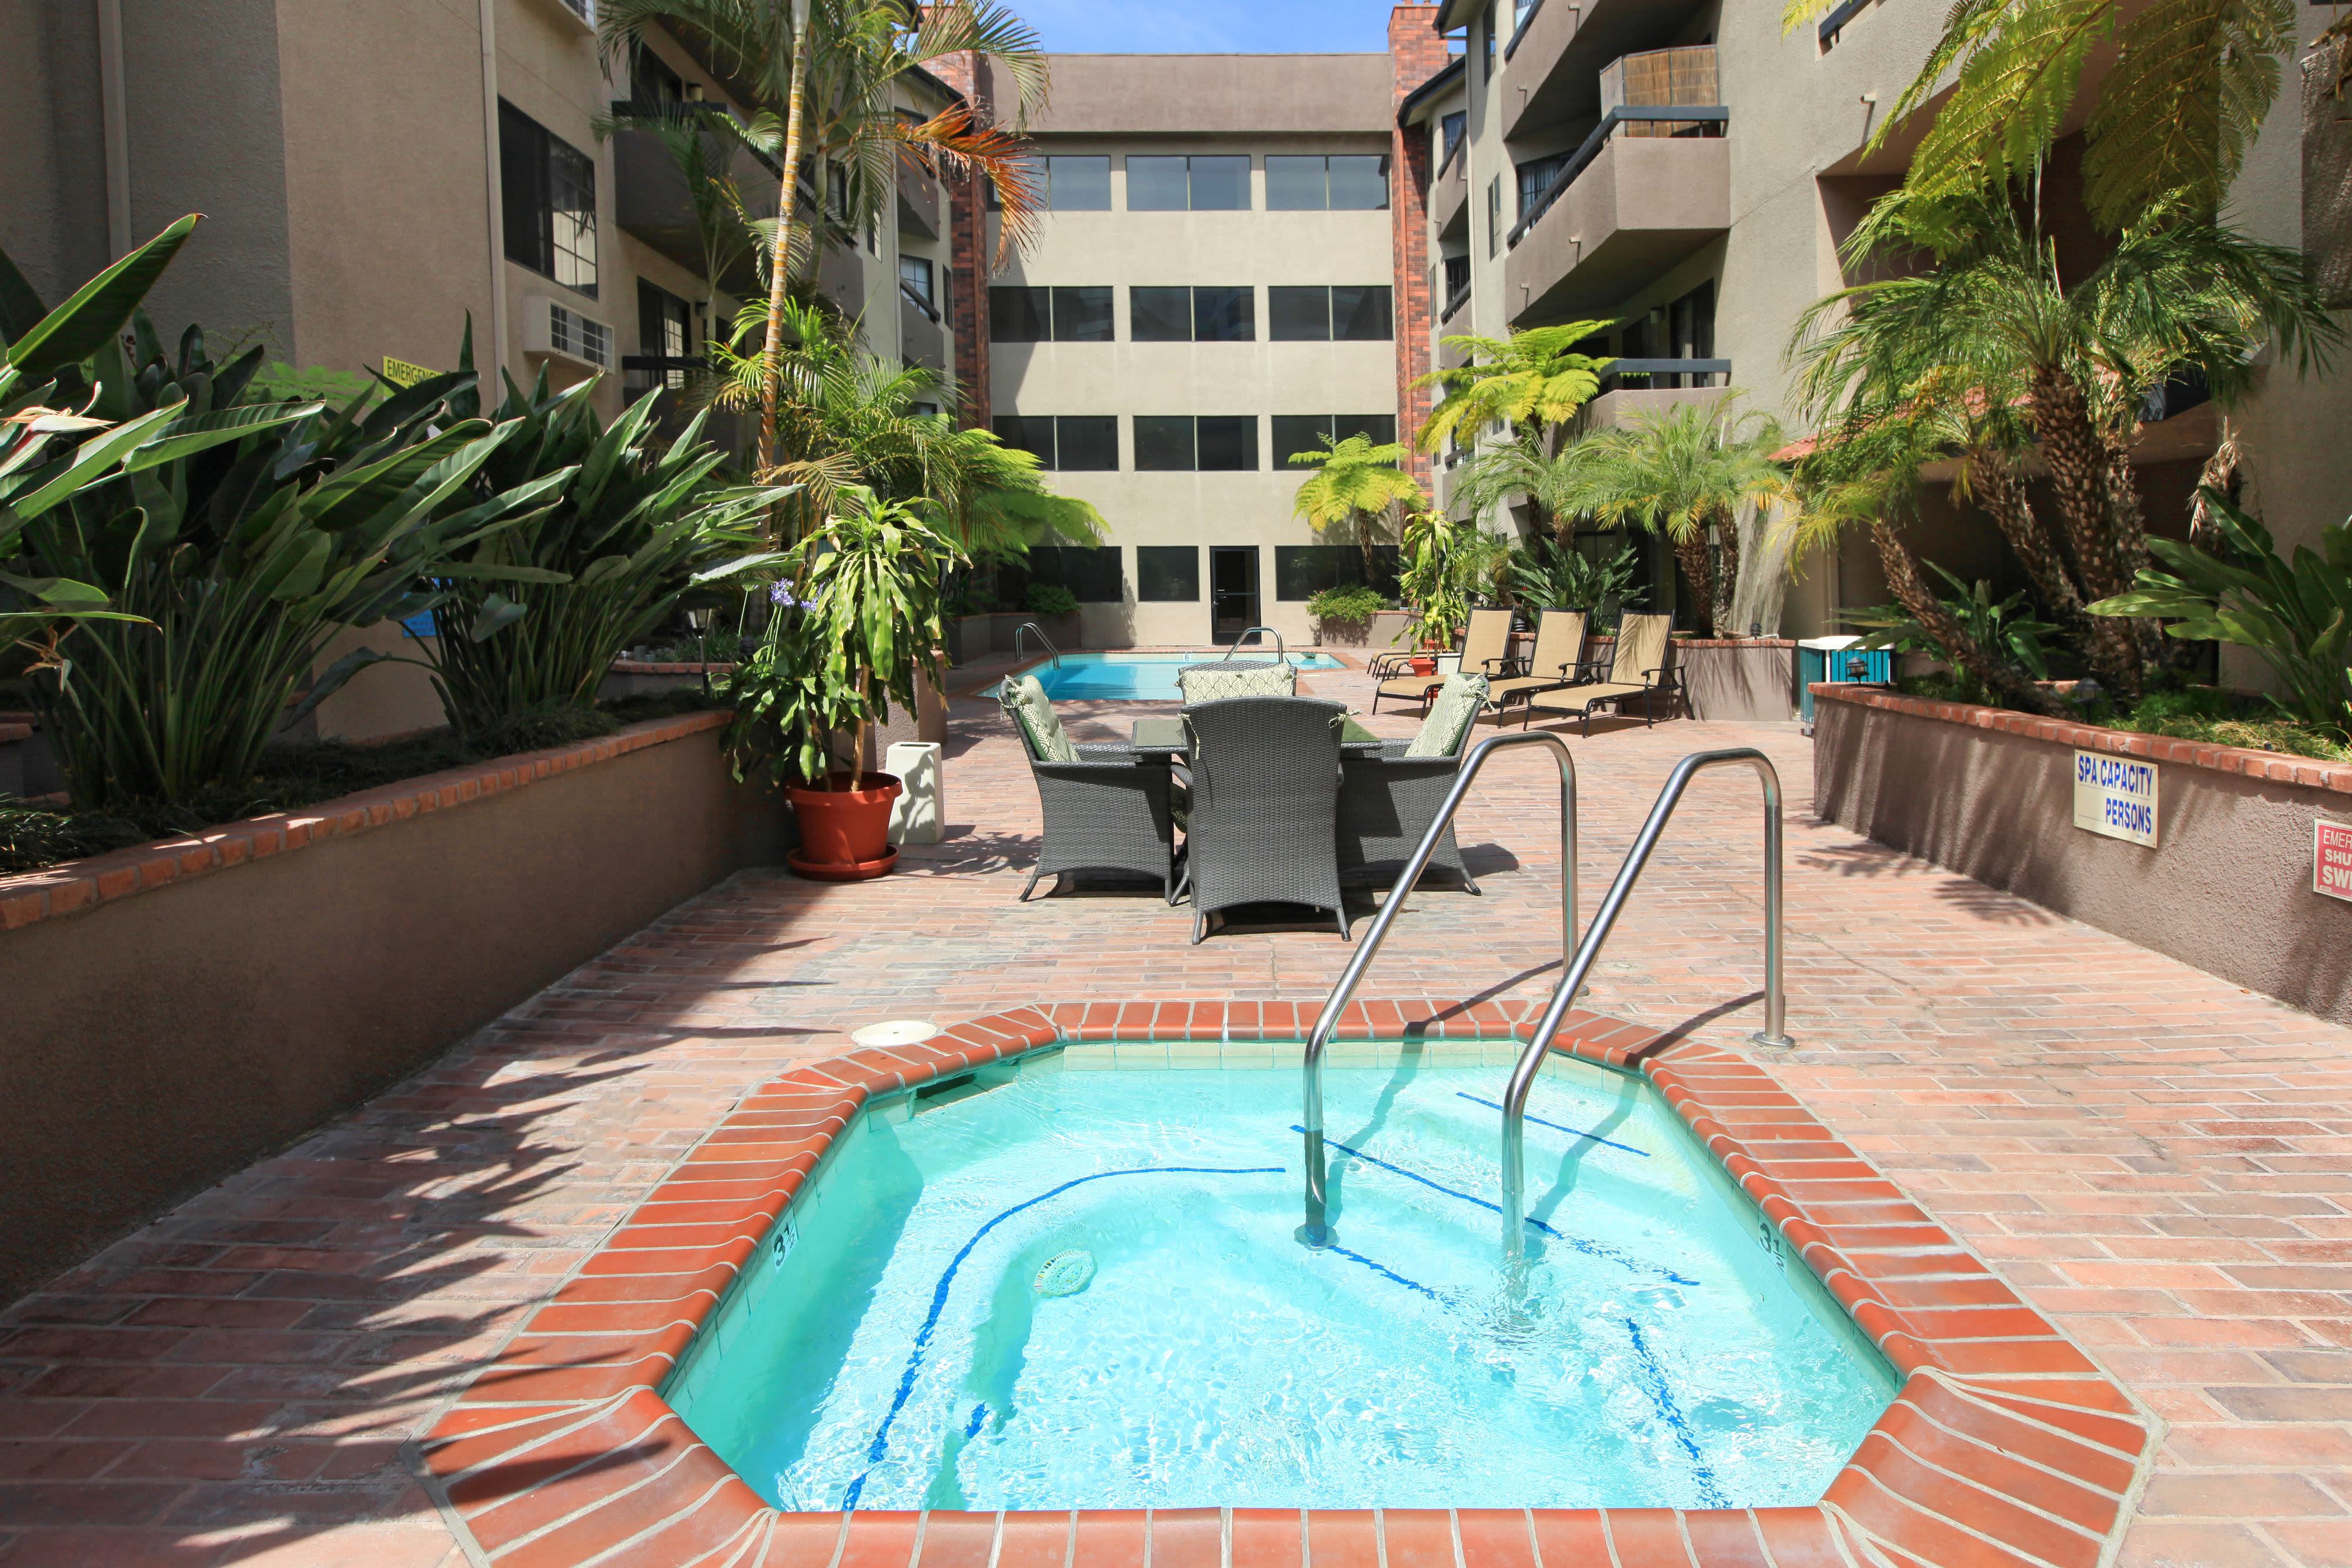 Hot tub at Savoy West Apartments in Los Angeles, California